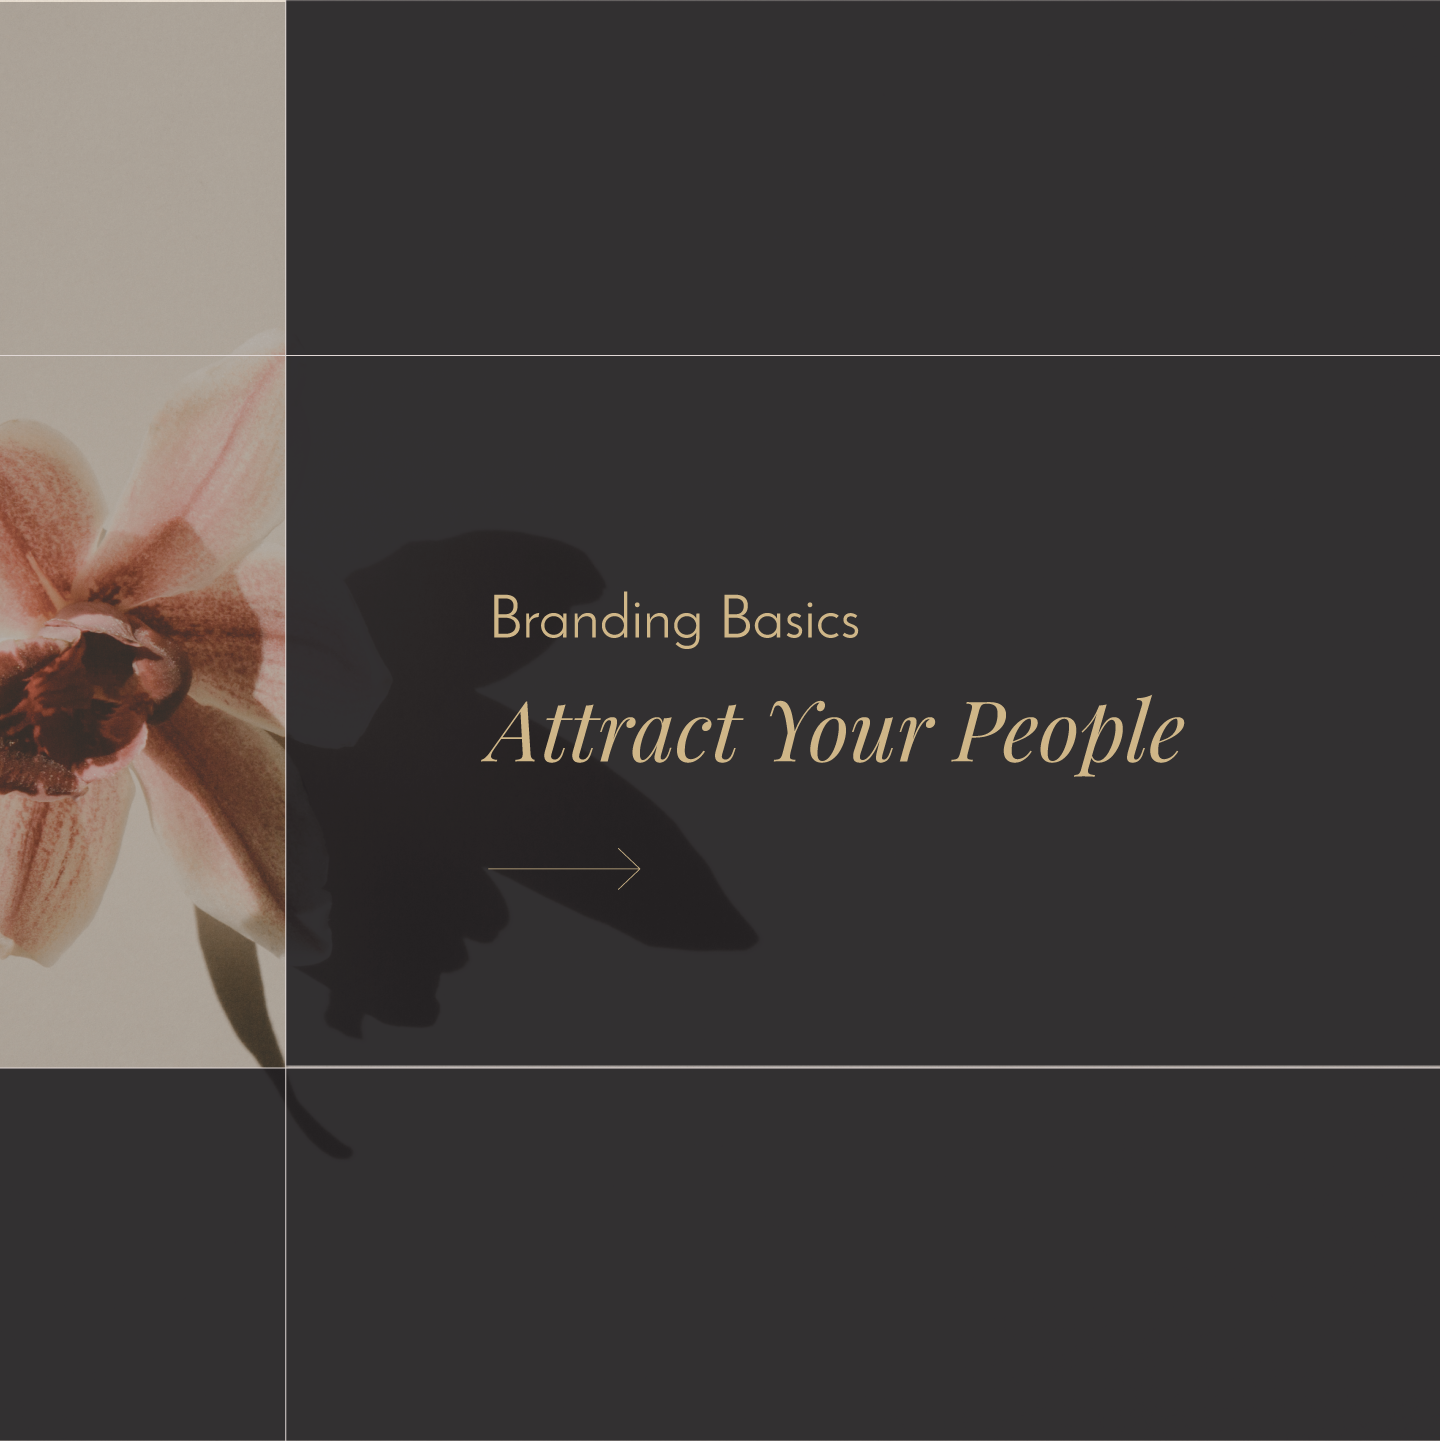 Branding Basics, Audience Profile, Attract Your People